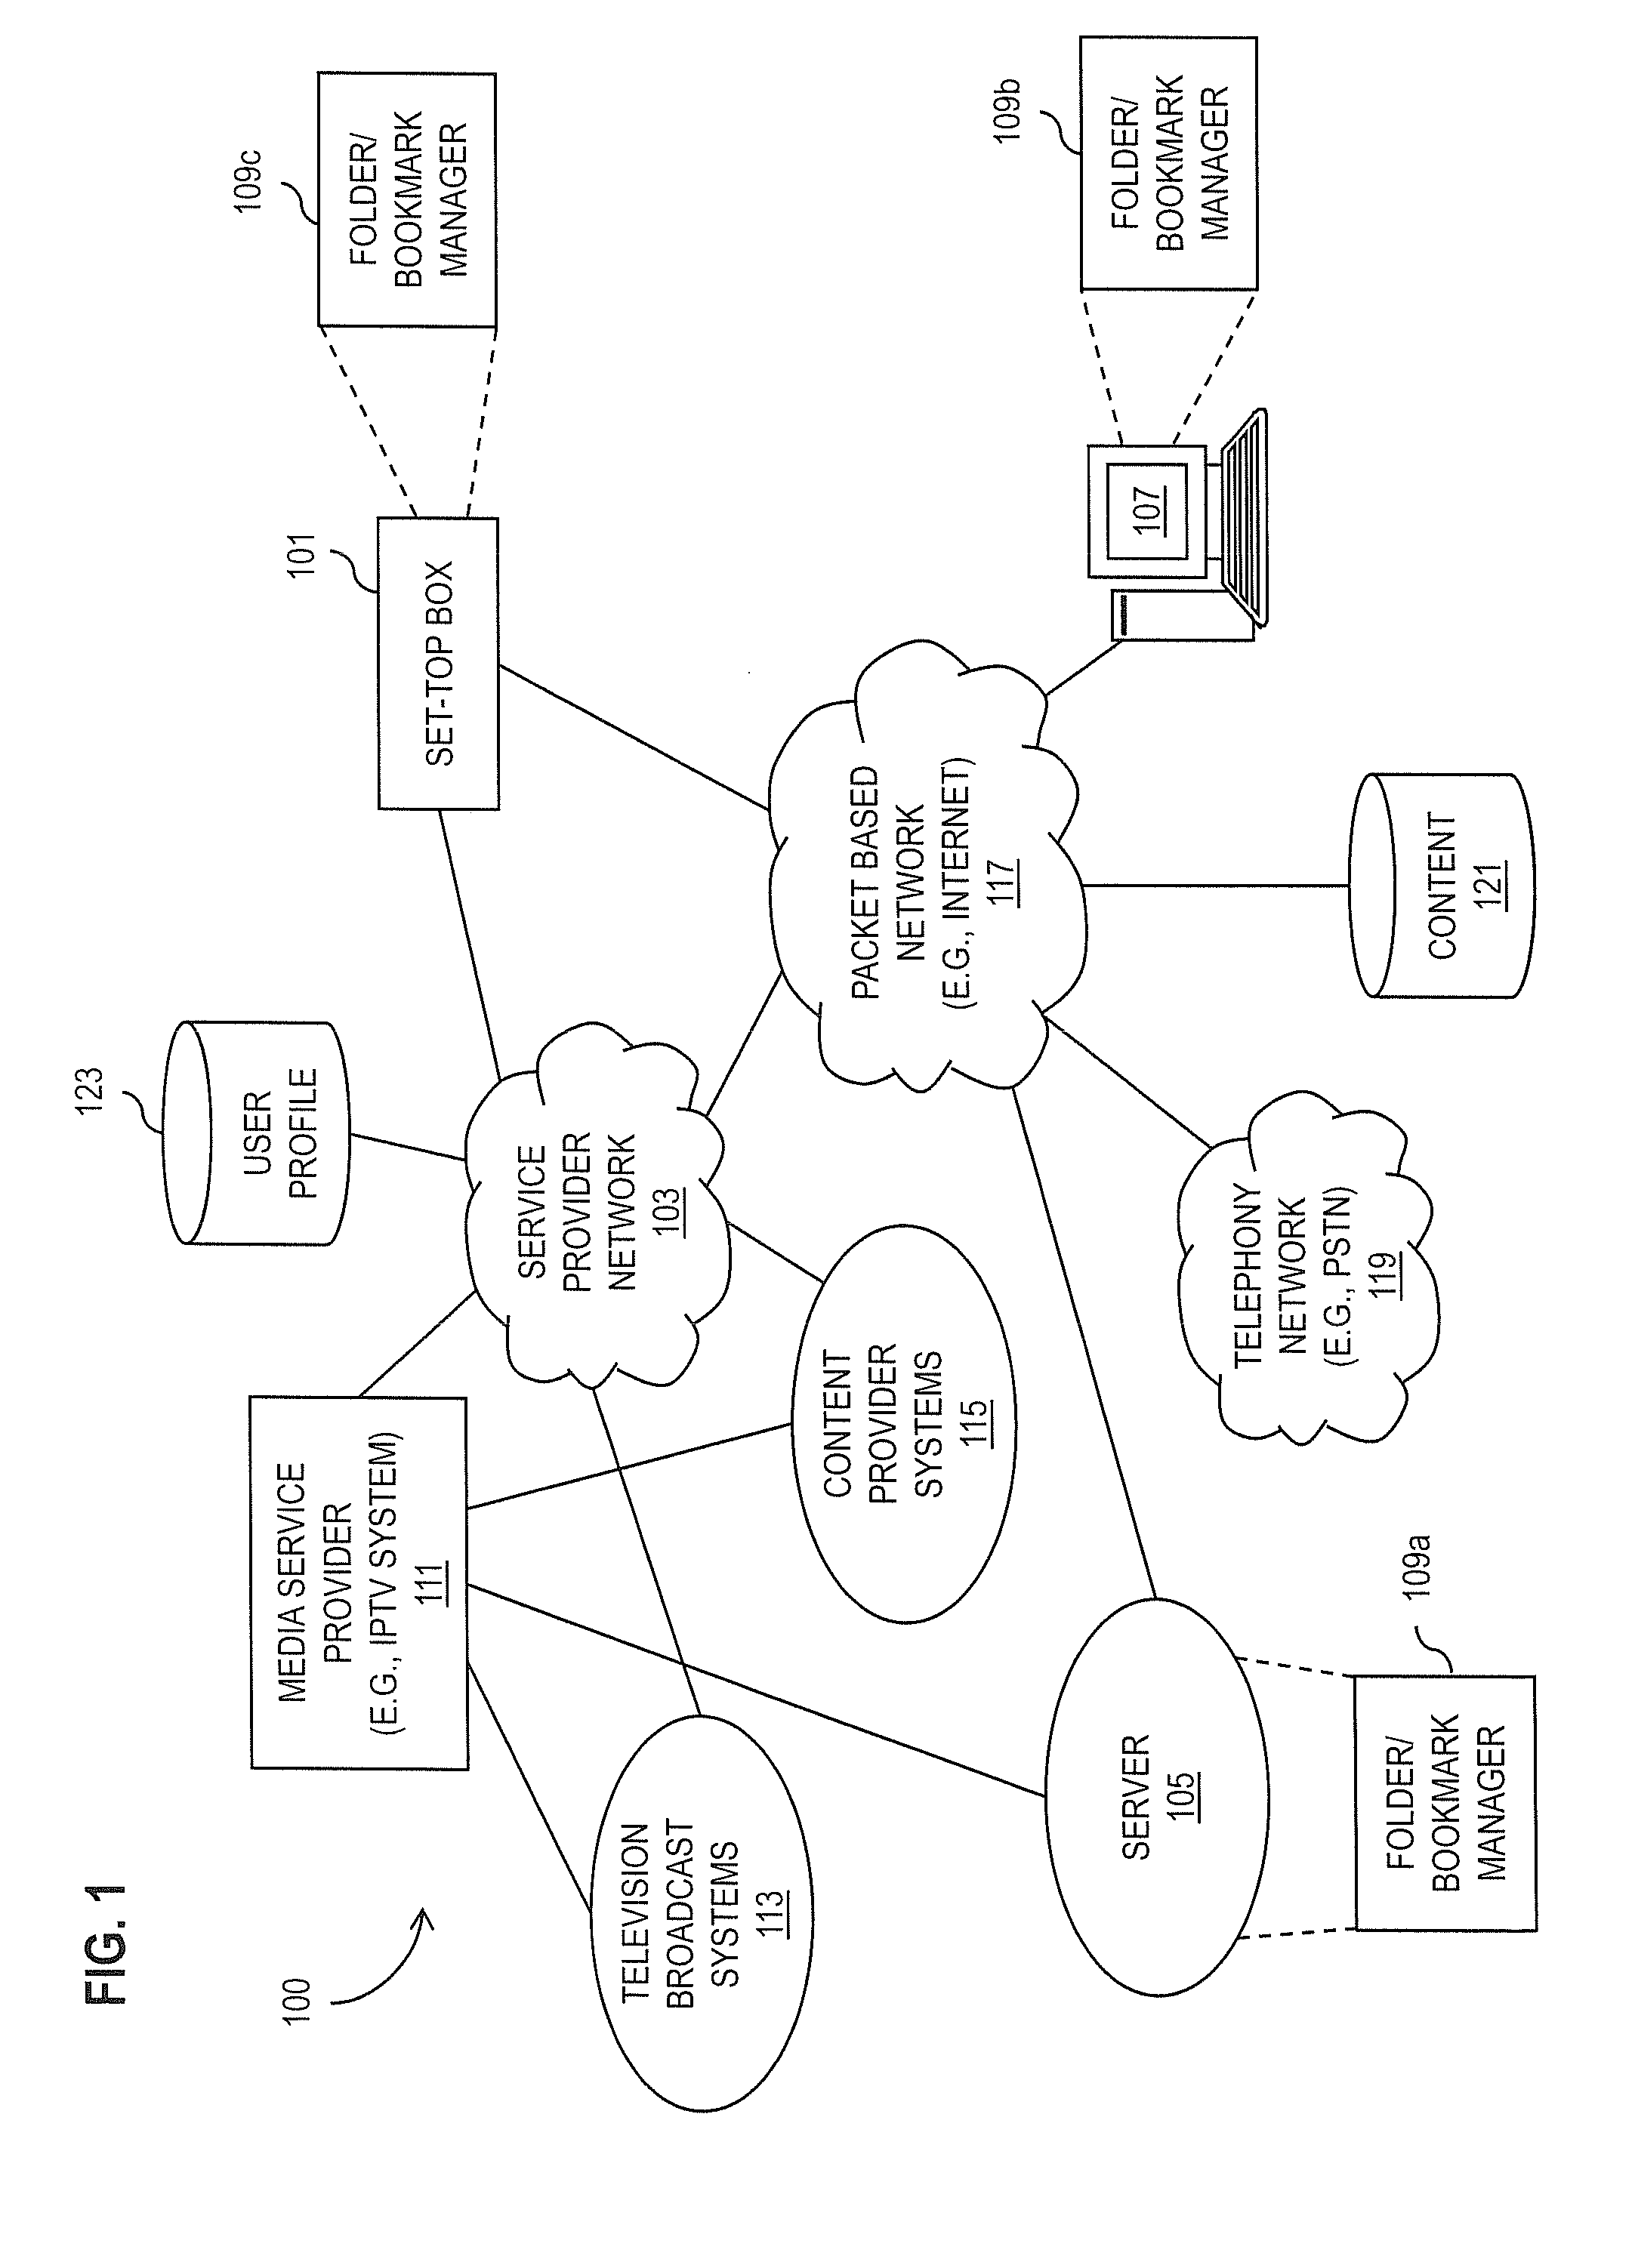 Method and apparatus for organizing and bookmarking content